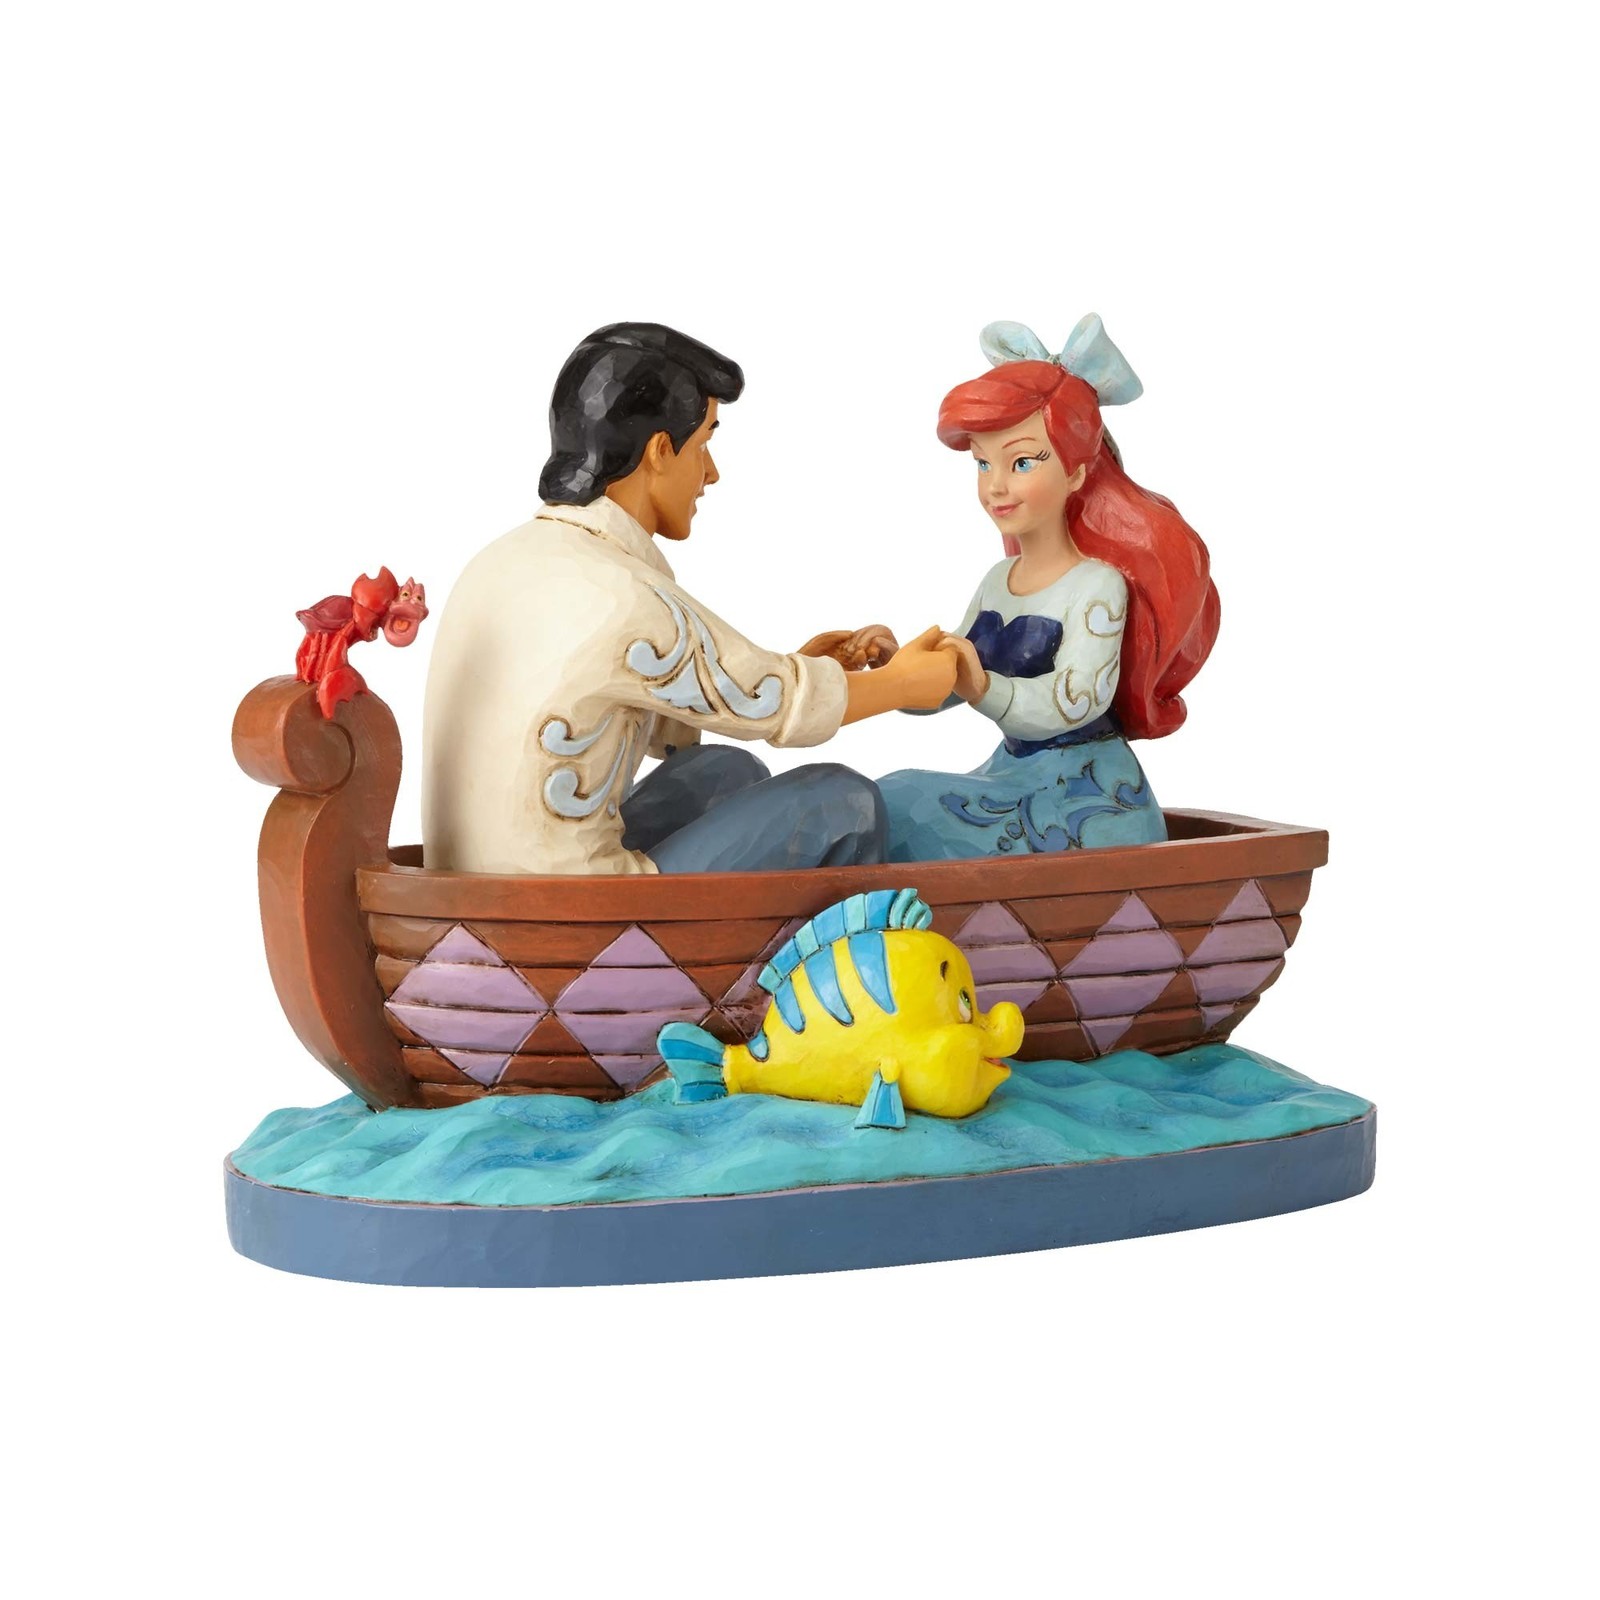 4055414, Waiting for a kiss, Waiting for a kiss Disney Traditions, Disney prinsesser, Disney Den lille havfrue, Den lille havfrue, Ariel, Ariel og Prins Erik, Ariel figur, Den lille havfrue figur, Den Lille Havfrue Venter På Kysset, Disney figur, Disney figurer, alle Disney figurer, eventyrfigur, eventyrfigurer, eventyrlig figur, eventyrlige figurer, magisk figur, magiske figurer, Disney shop, Disney butik, Disney butikDK, Disney butik I Danmark, Jim shore figur, Disney traditions figure, udstillingsfigur, Disney samlerobjekt, Disney Traditions by Jim Shore, Jim Shore, Disney samling, Disney samler, Jim Shore,